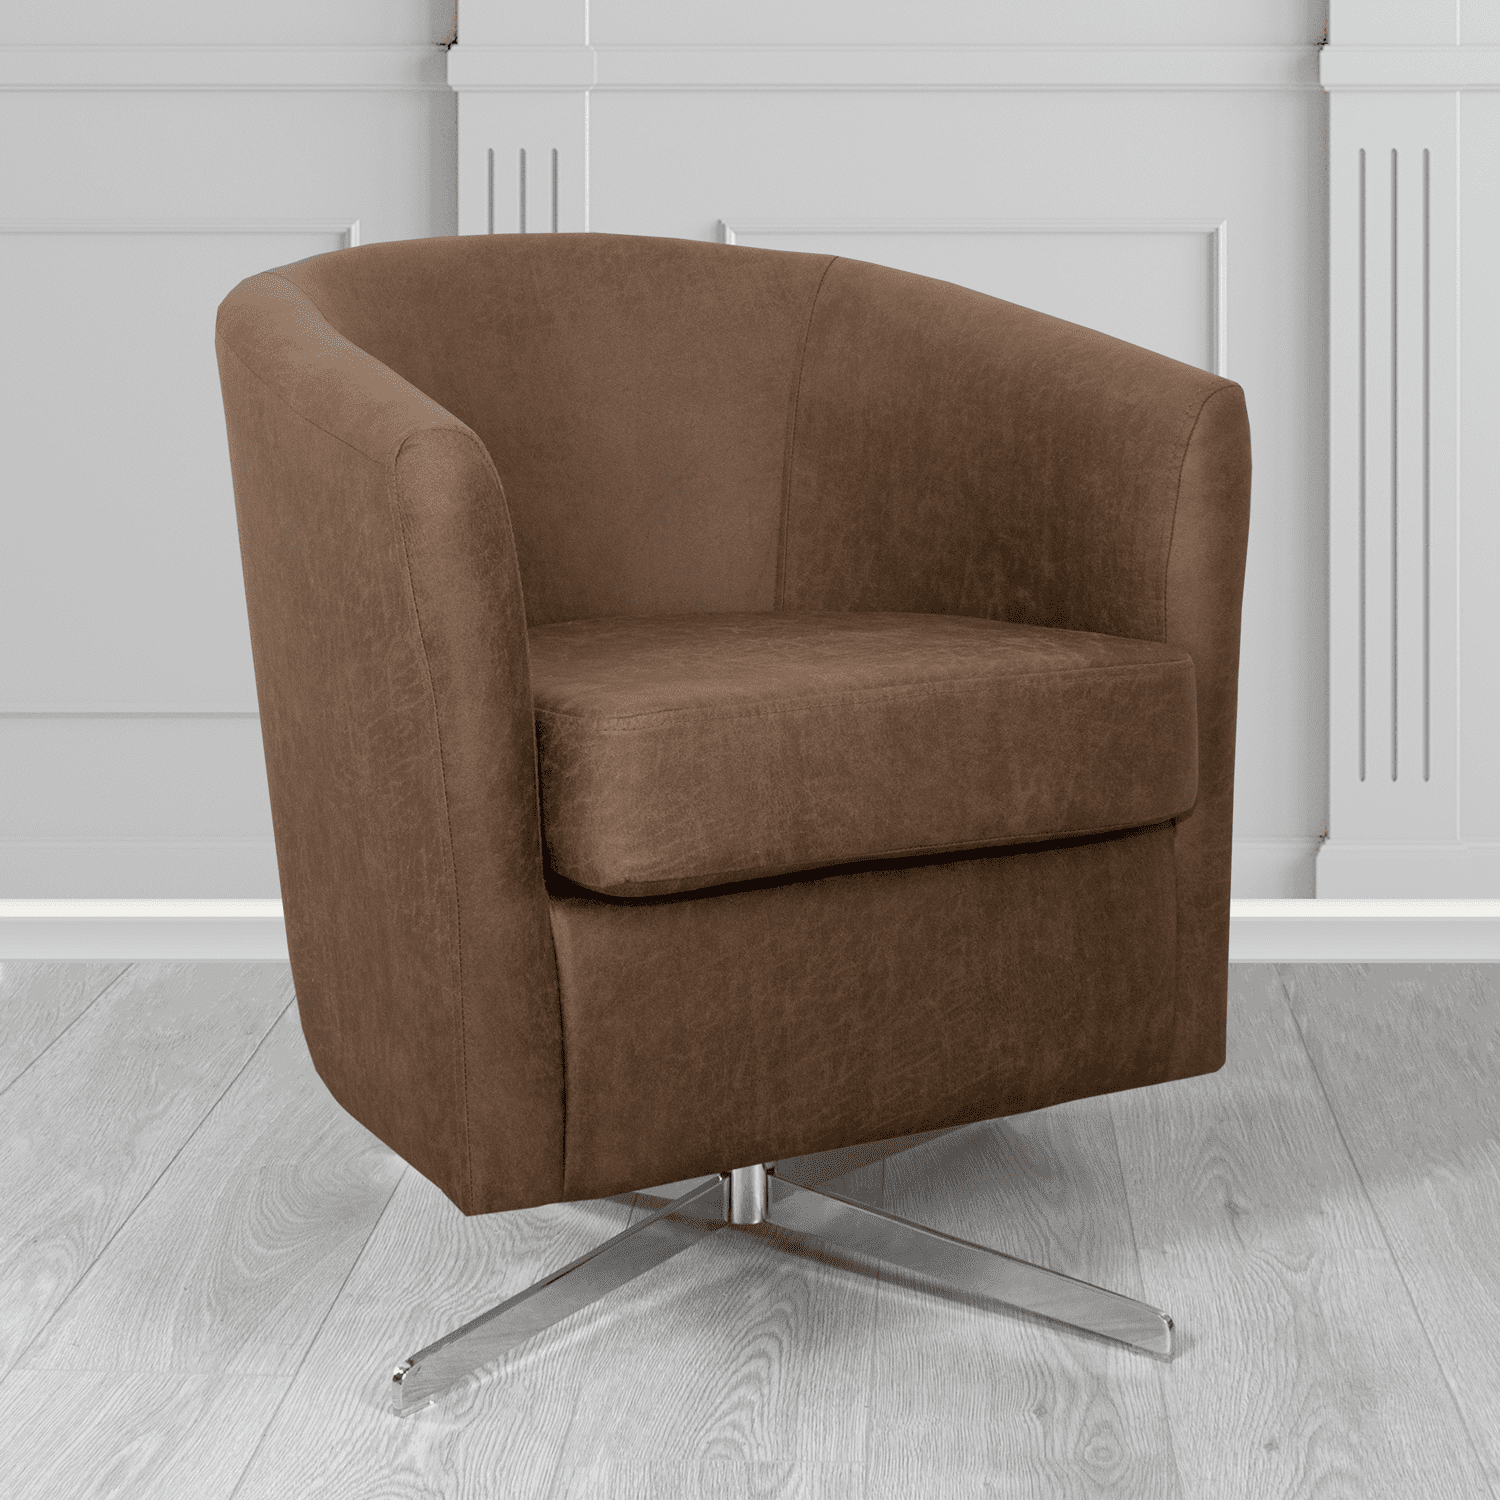 Cannes Swivel Tub Chair in Nevada Chocolate Faux Leather - The Tub Chair Shop